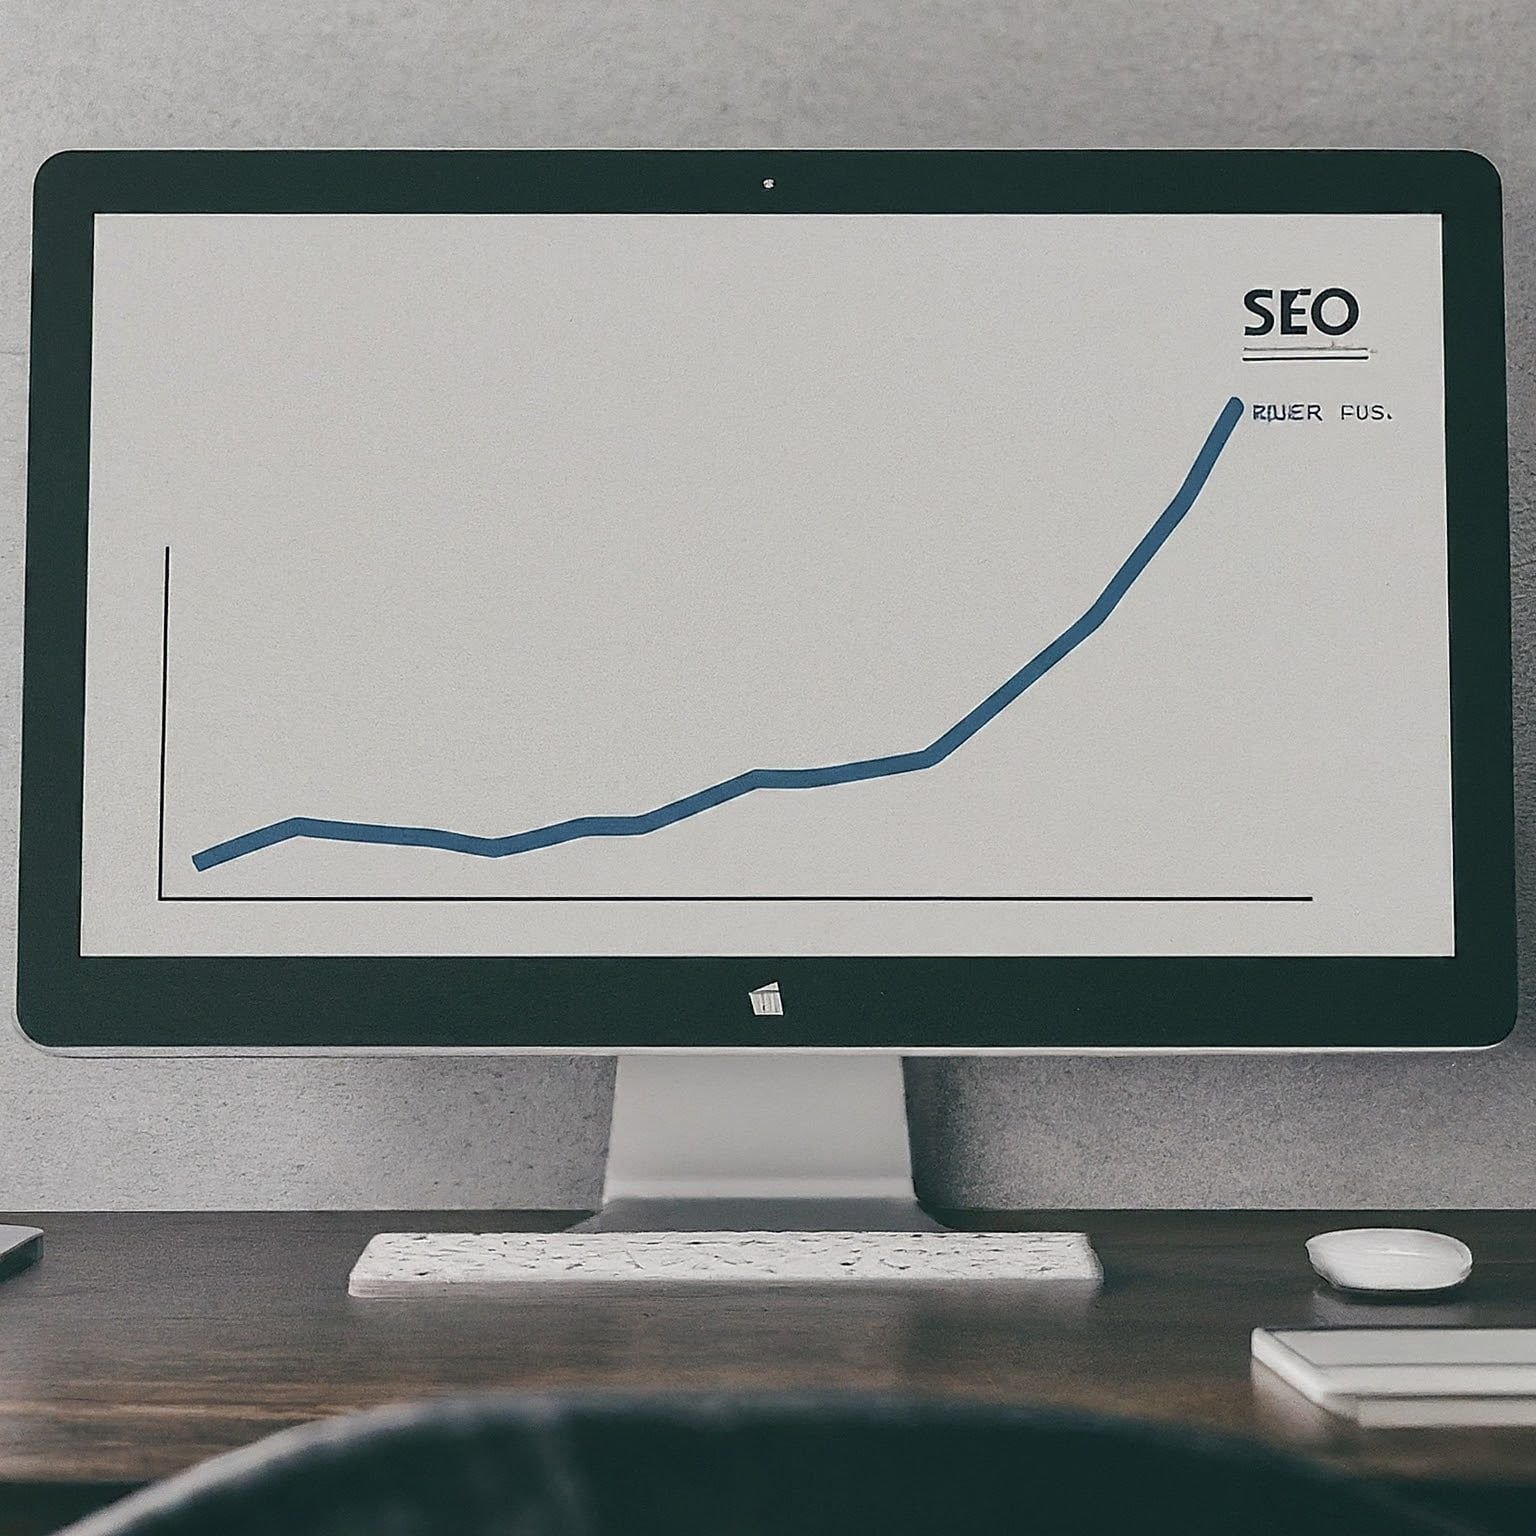 Line graph titled 'SEO Traffic Growth' shows a steady upward trend, illustrating increased website traffic from search engine optimization efforts.